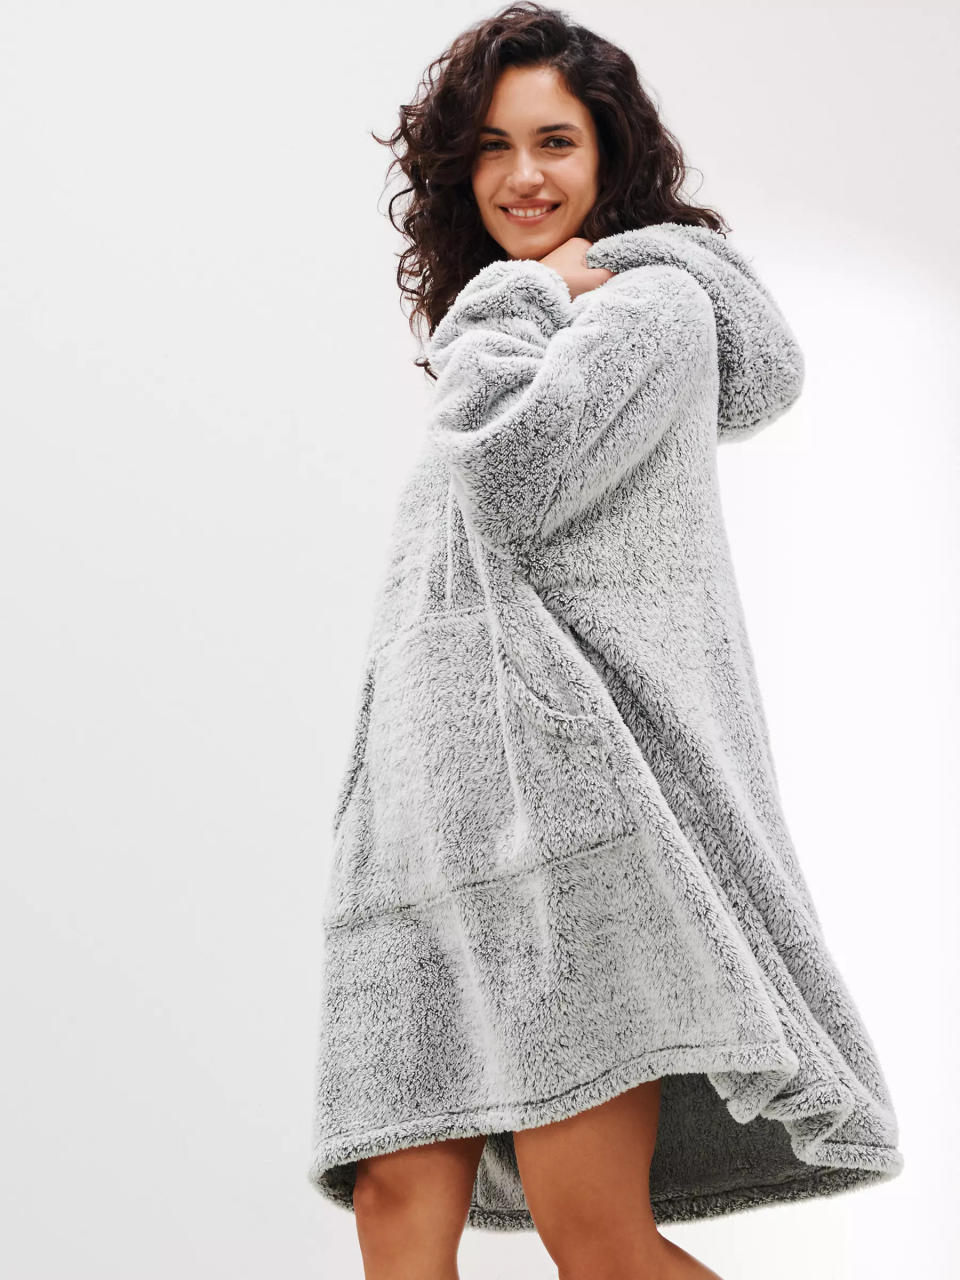 Like a hug in a hoodie - this will keep you cosy and warm. (John Lewis & Partners)